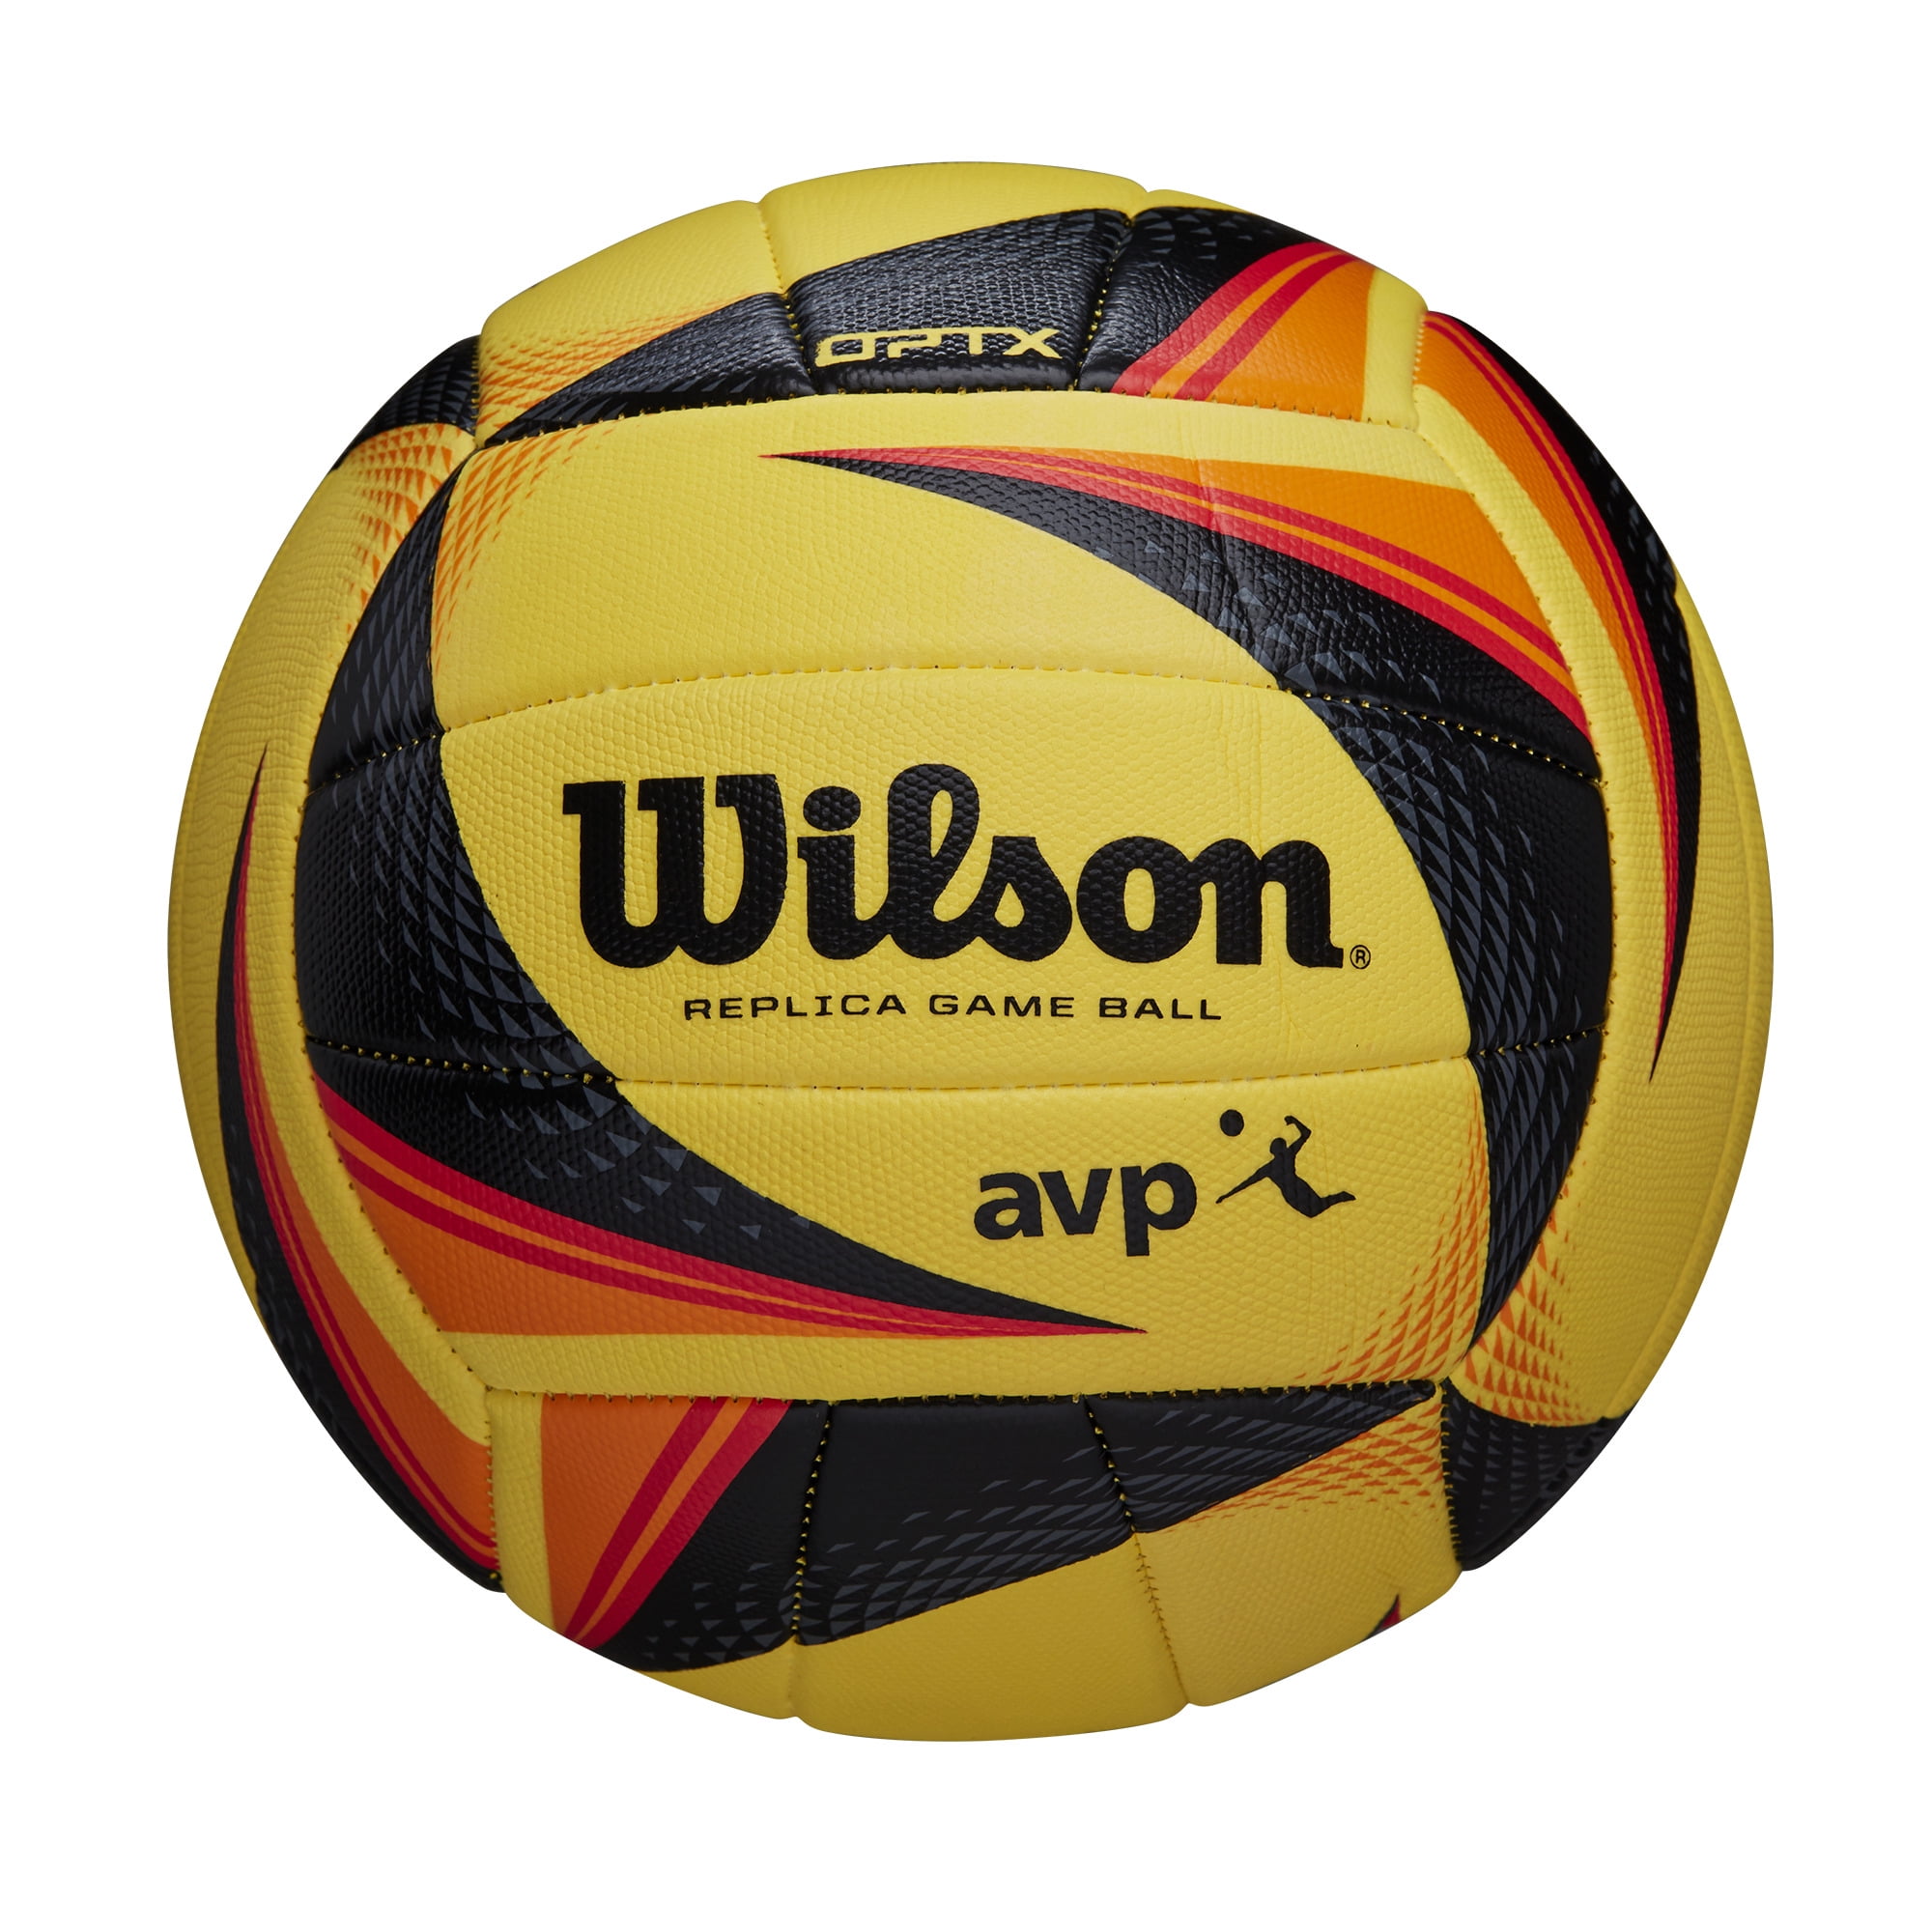 Outdoor Volleyball Game Official Size Graffiti Leather Ball Red/White/Blue New 